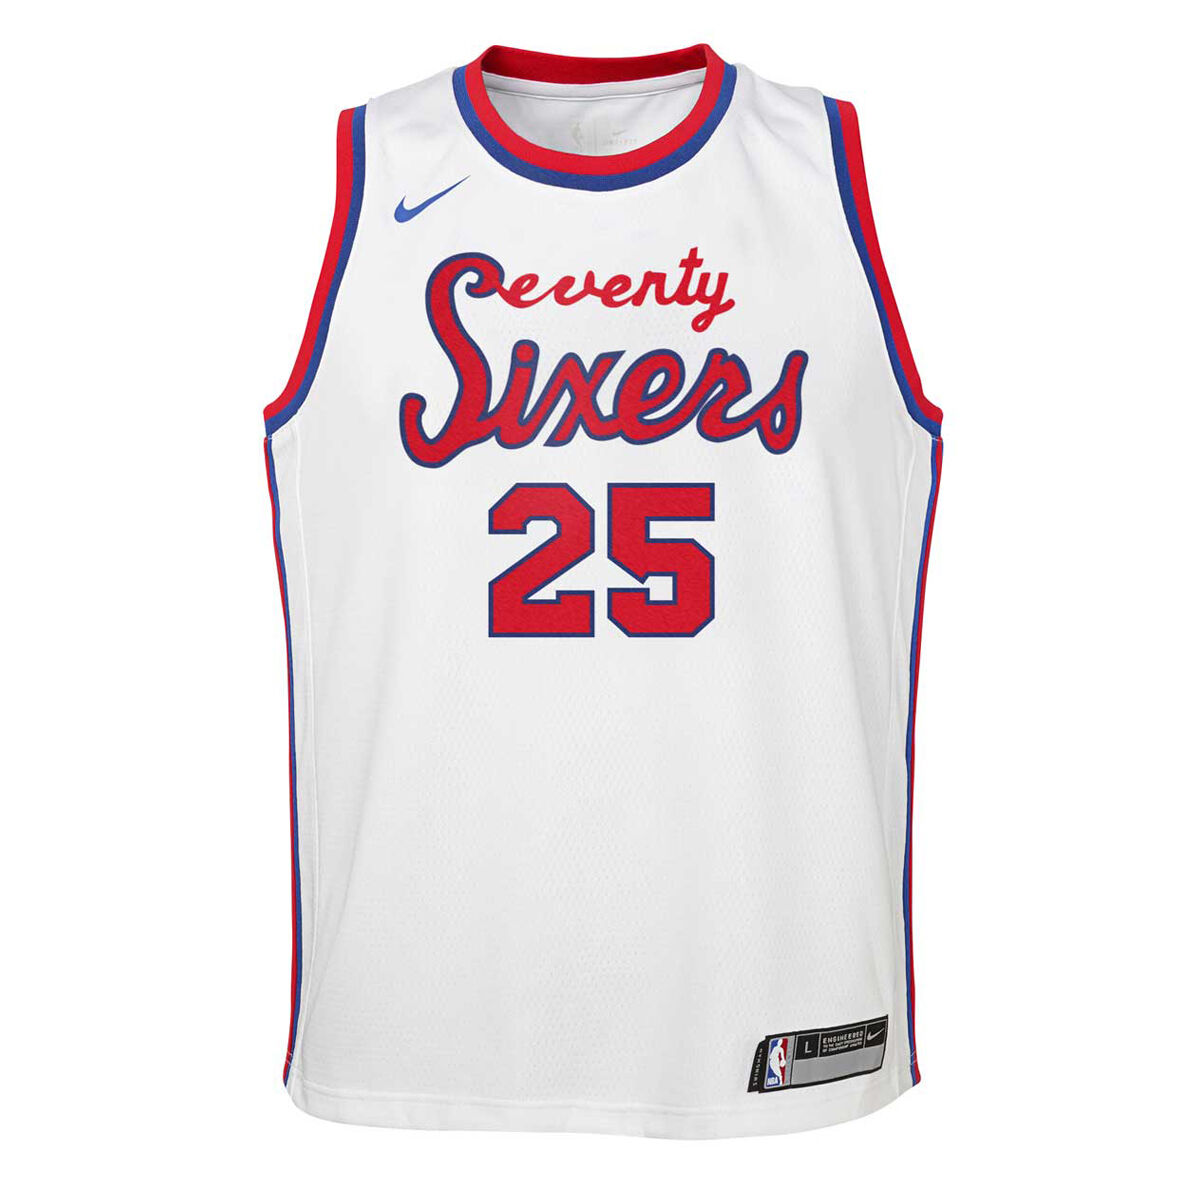 76ers white jersey